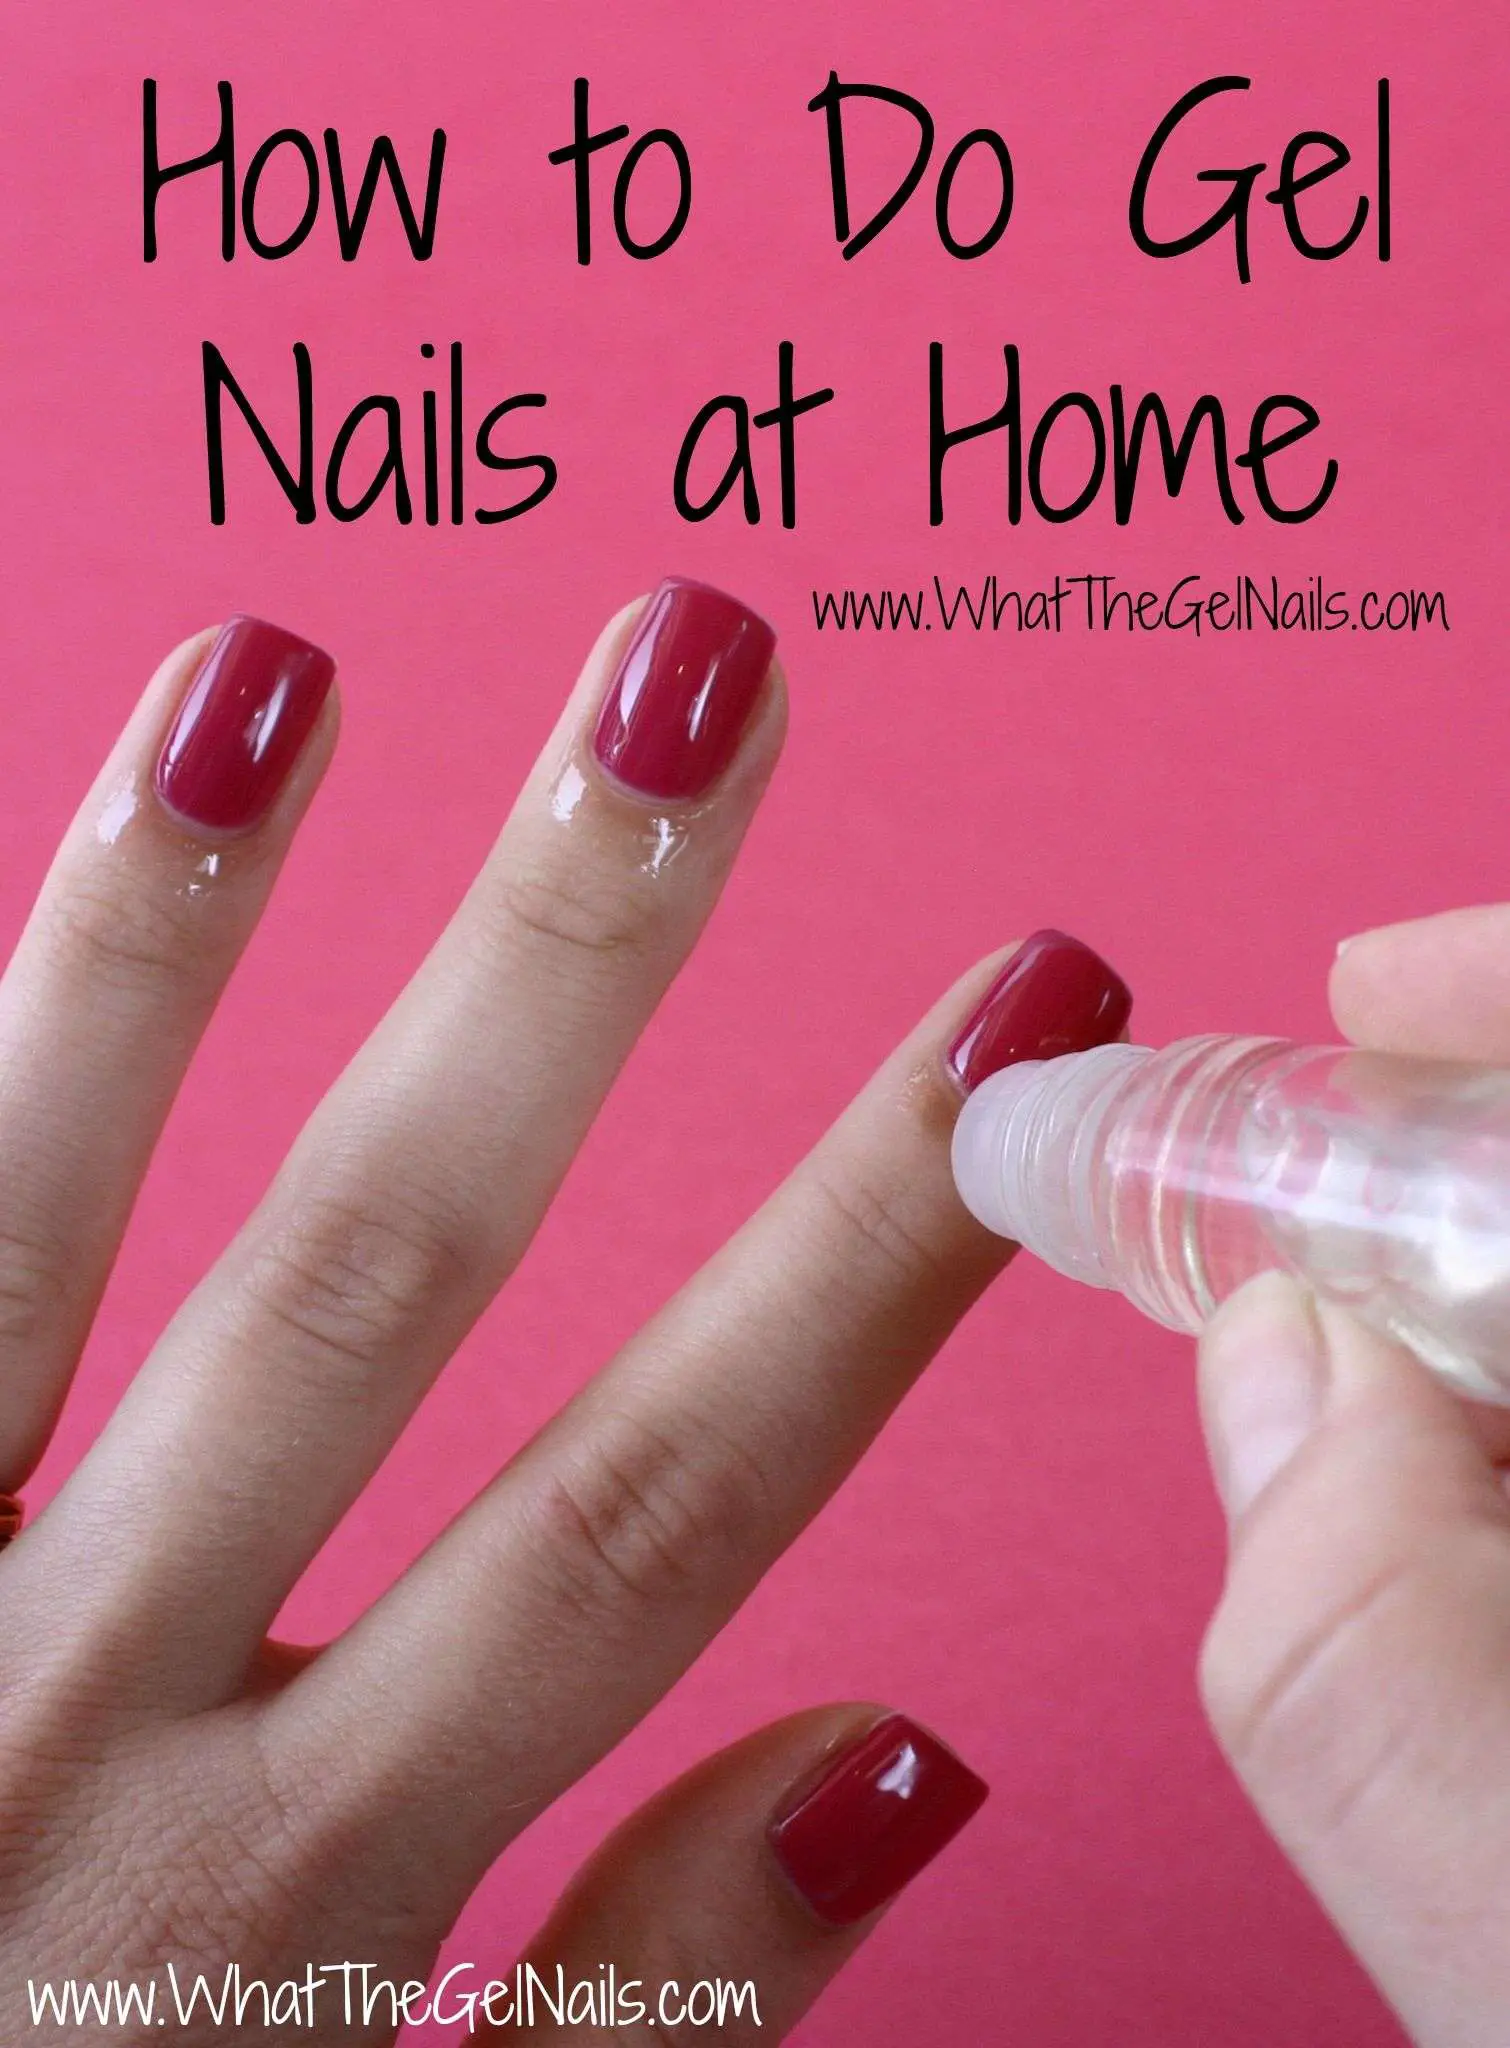 How to Do Gel Nails at Home... all i need is my UV lamp to ...